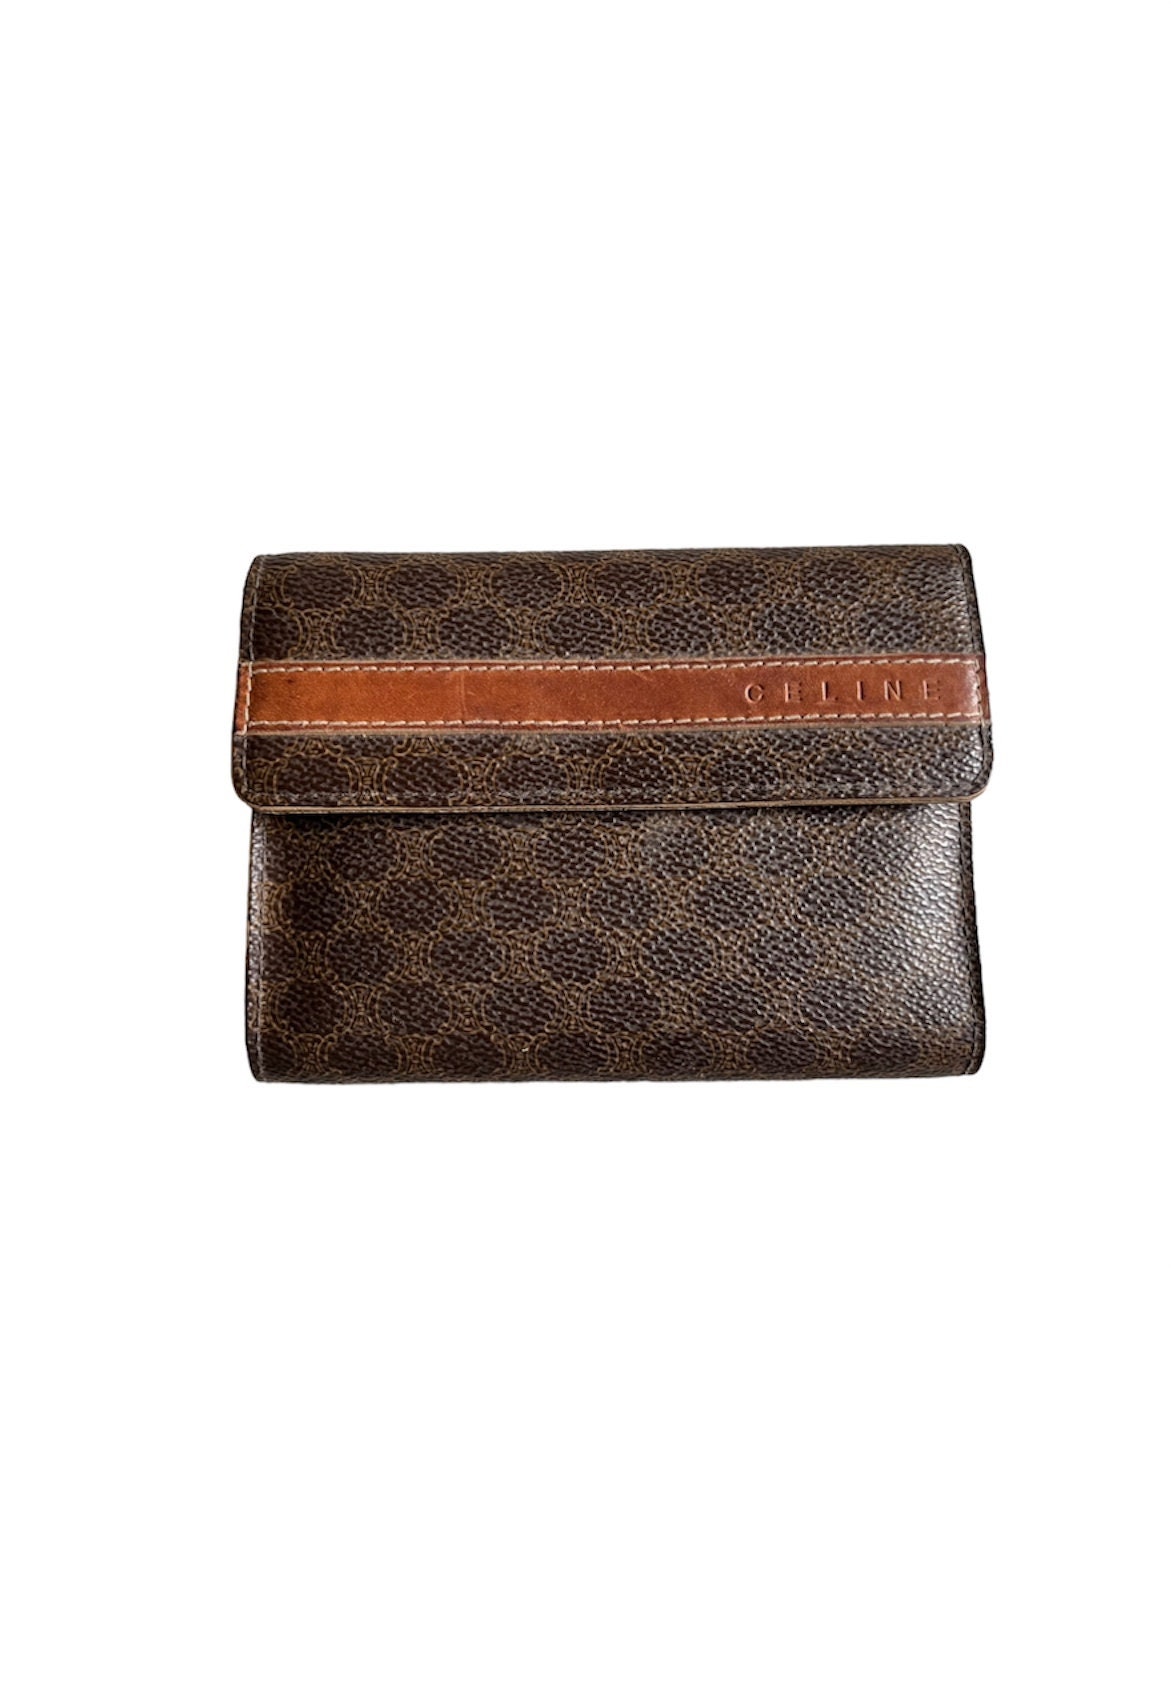 Celine - Authenticated Triomphe Wallet - Leather Brown Plain for Women, Very Good Condition